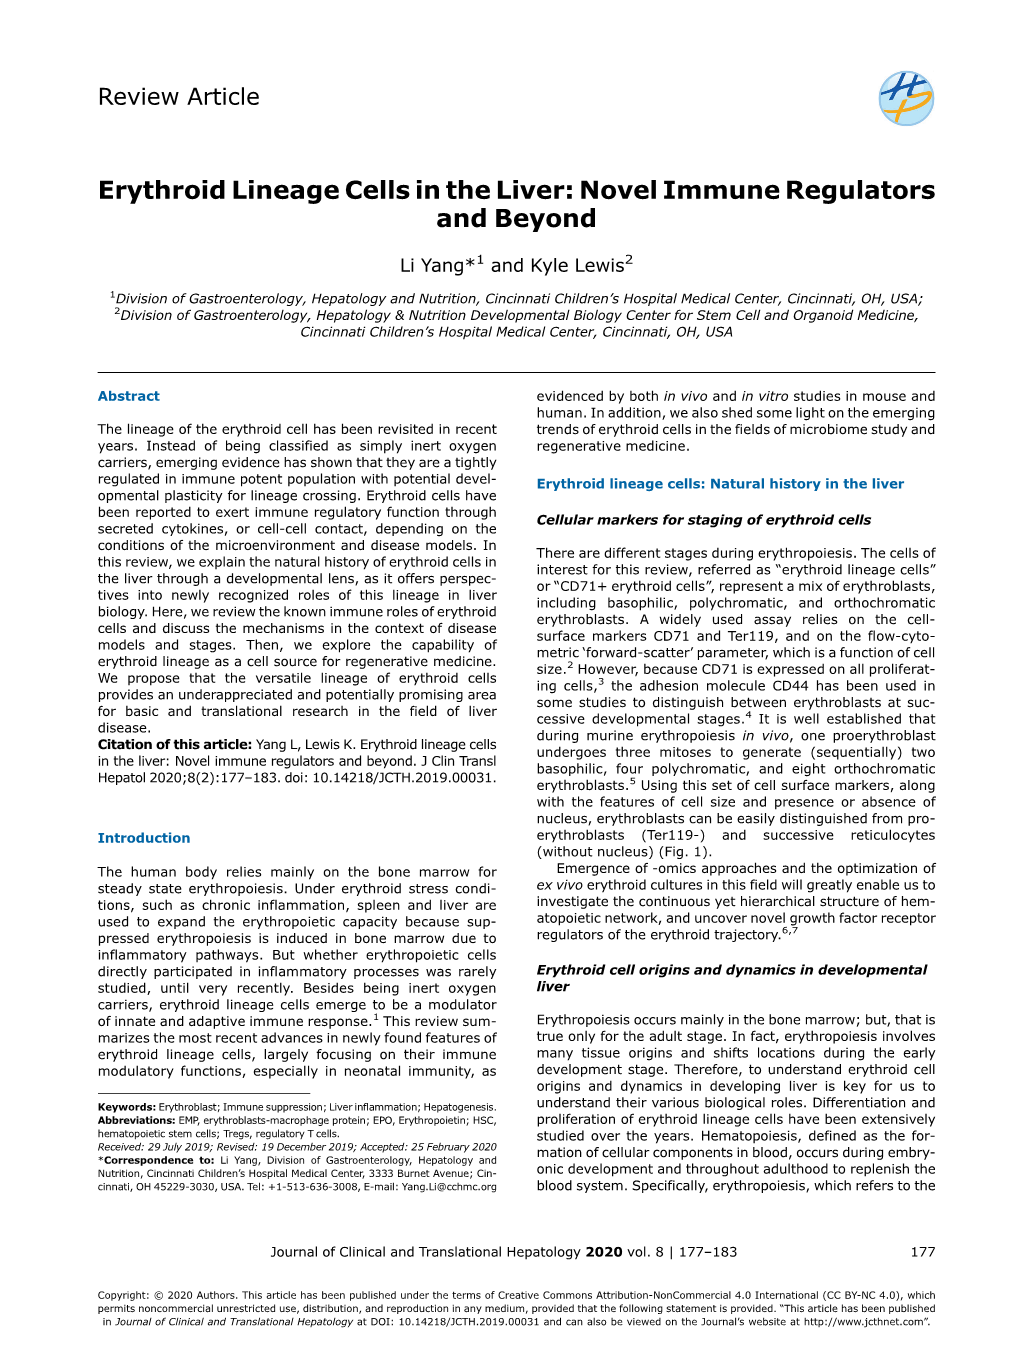 Erythroid Lineage Cells in the Liver: Novel Immune Regulators and Beyond